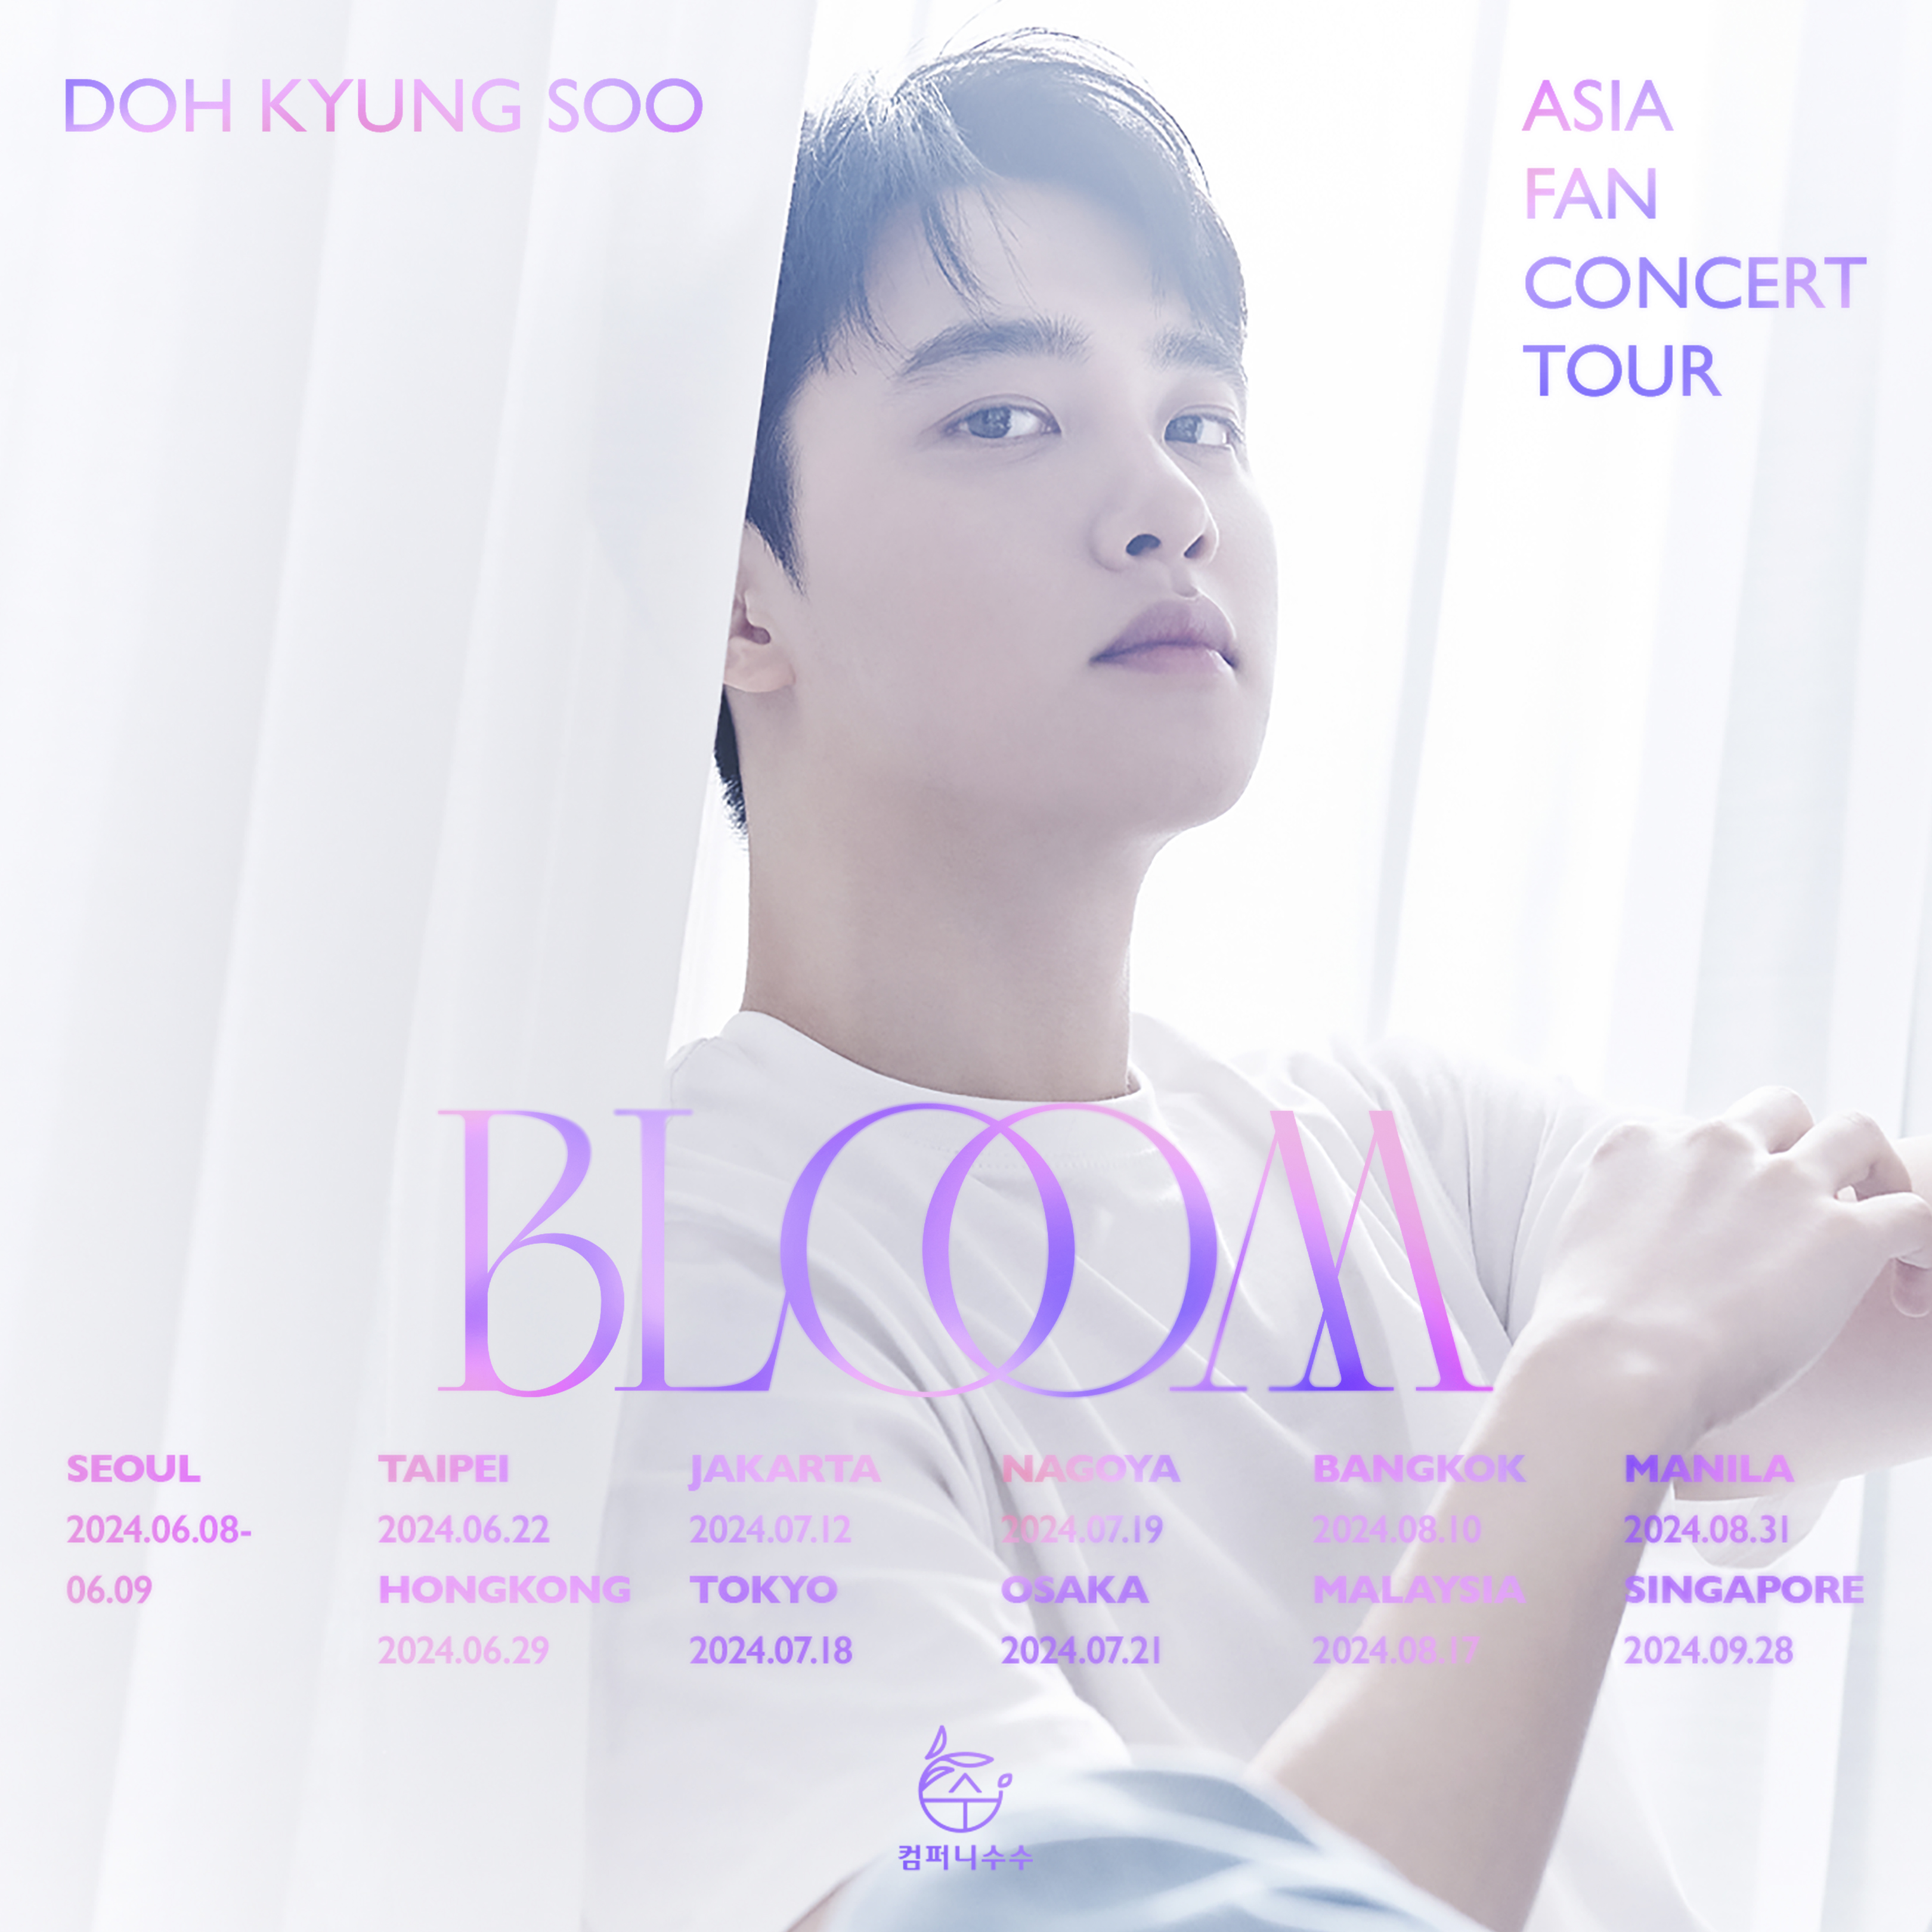 Exo's Doh Kyung-soo to hold first solo fan concert in Singapore in September